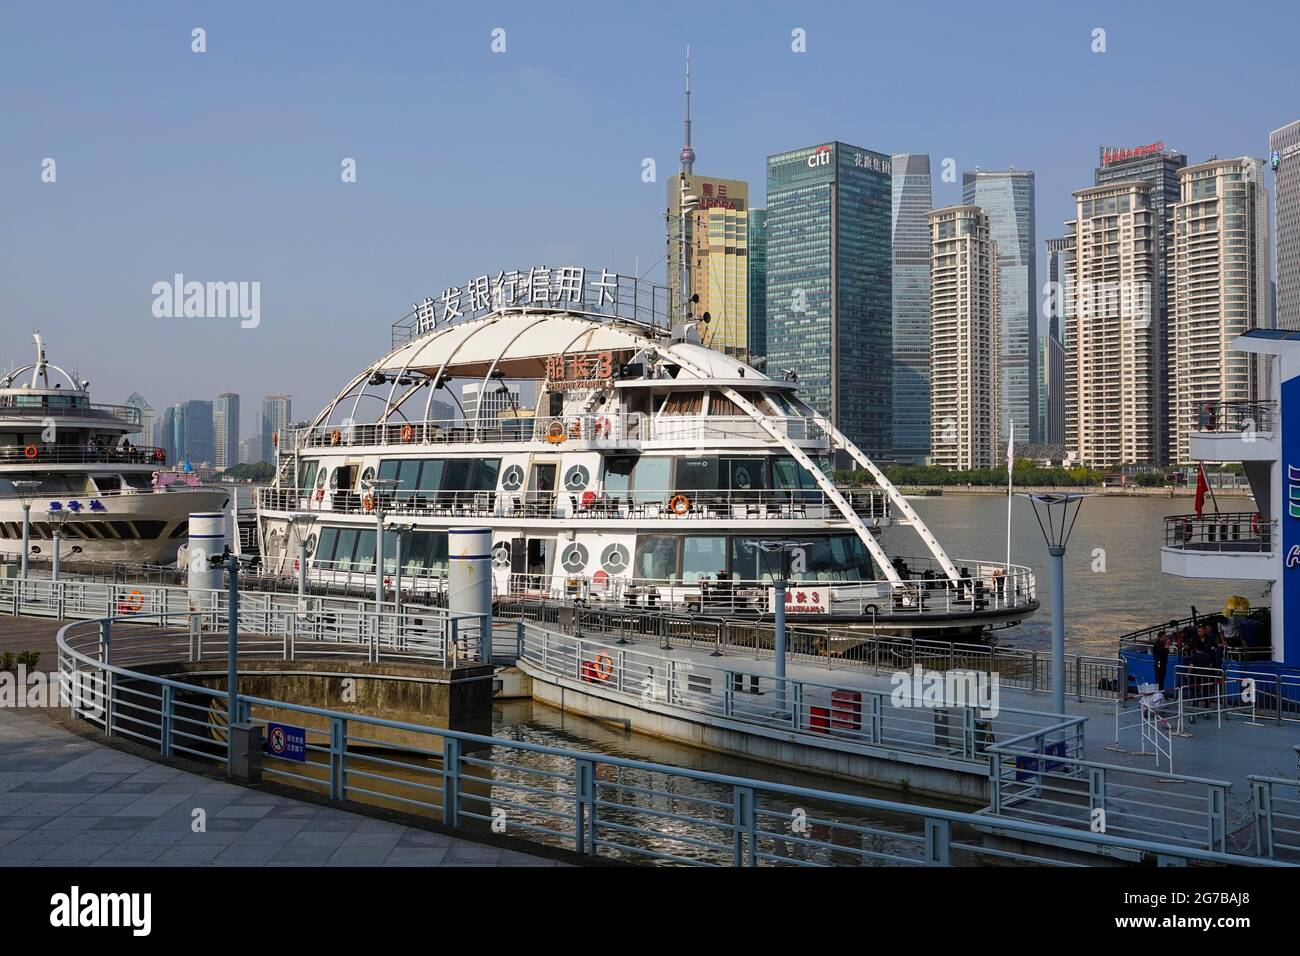 View from a pier across the Huangpu River to the skyline of the Pudong Special Economic Zone, Shanghai, People's Republic of China Stock Photo